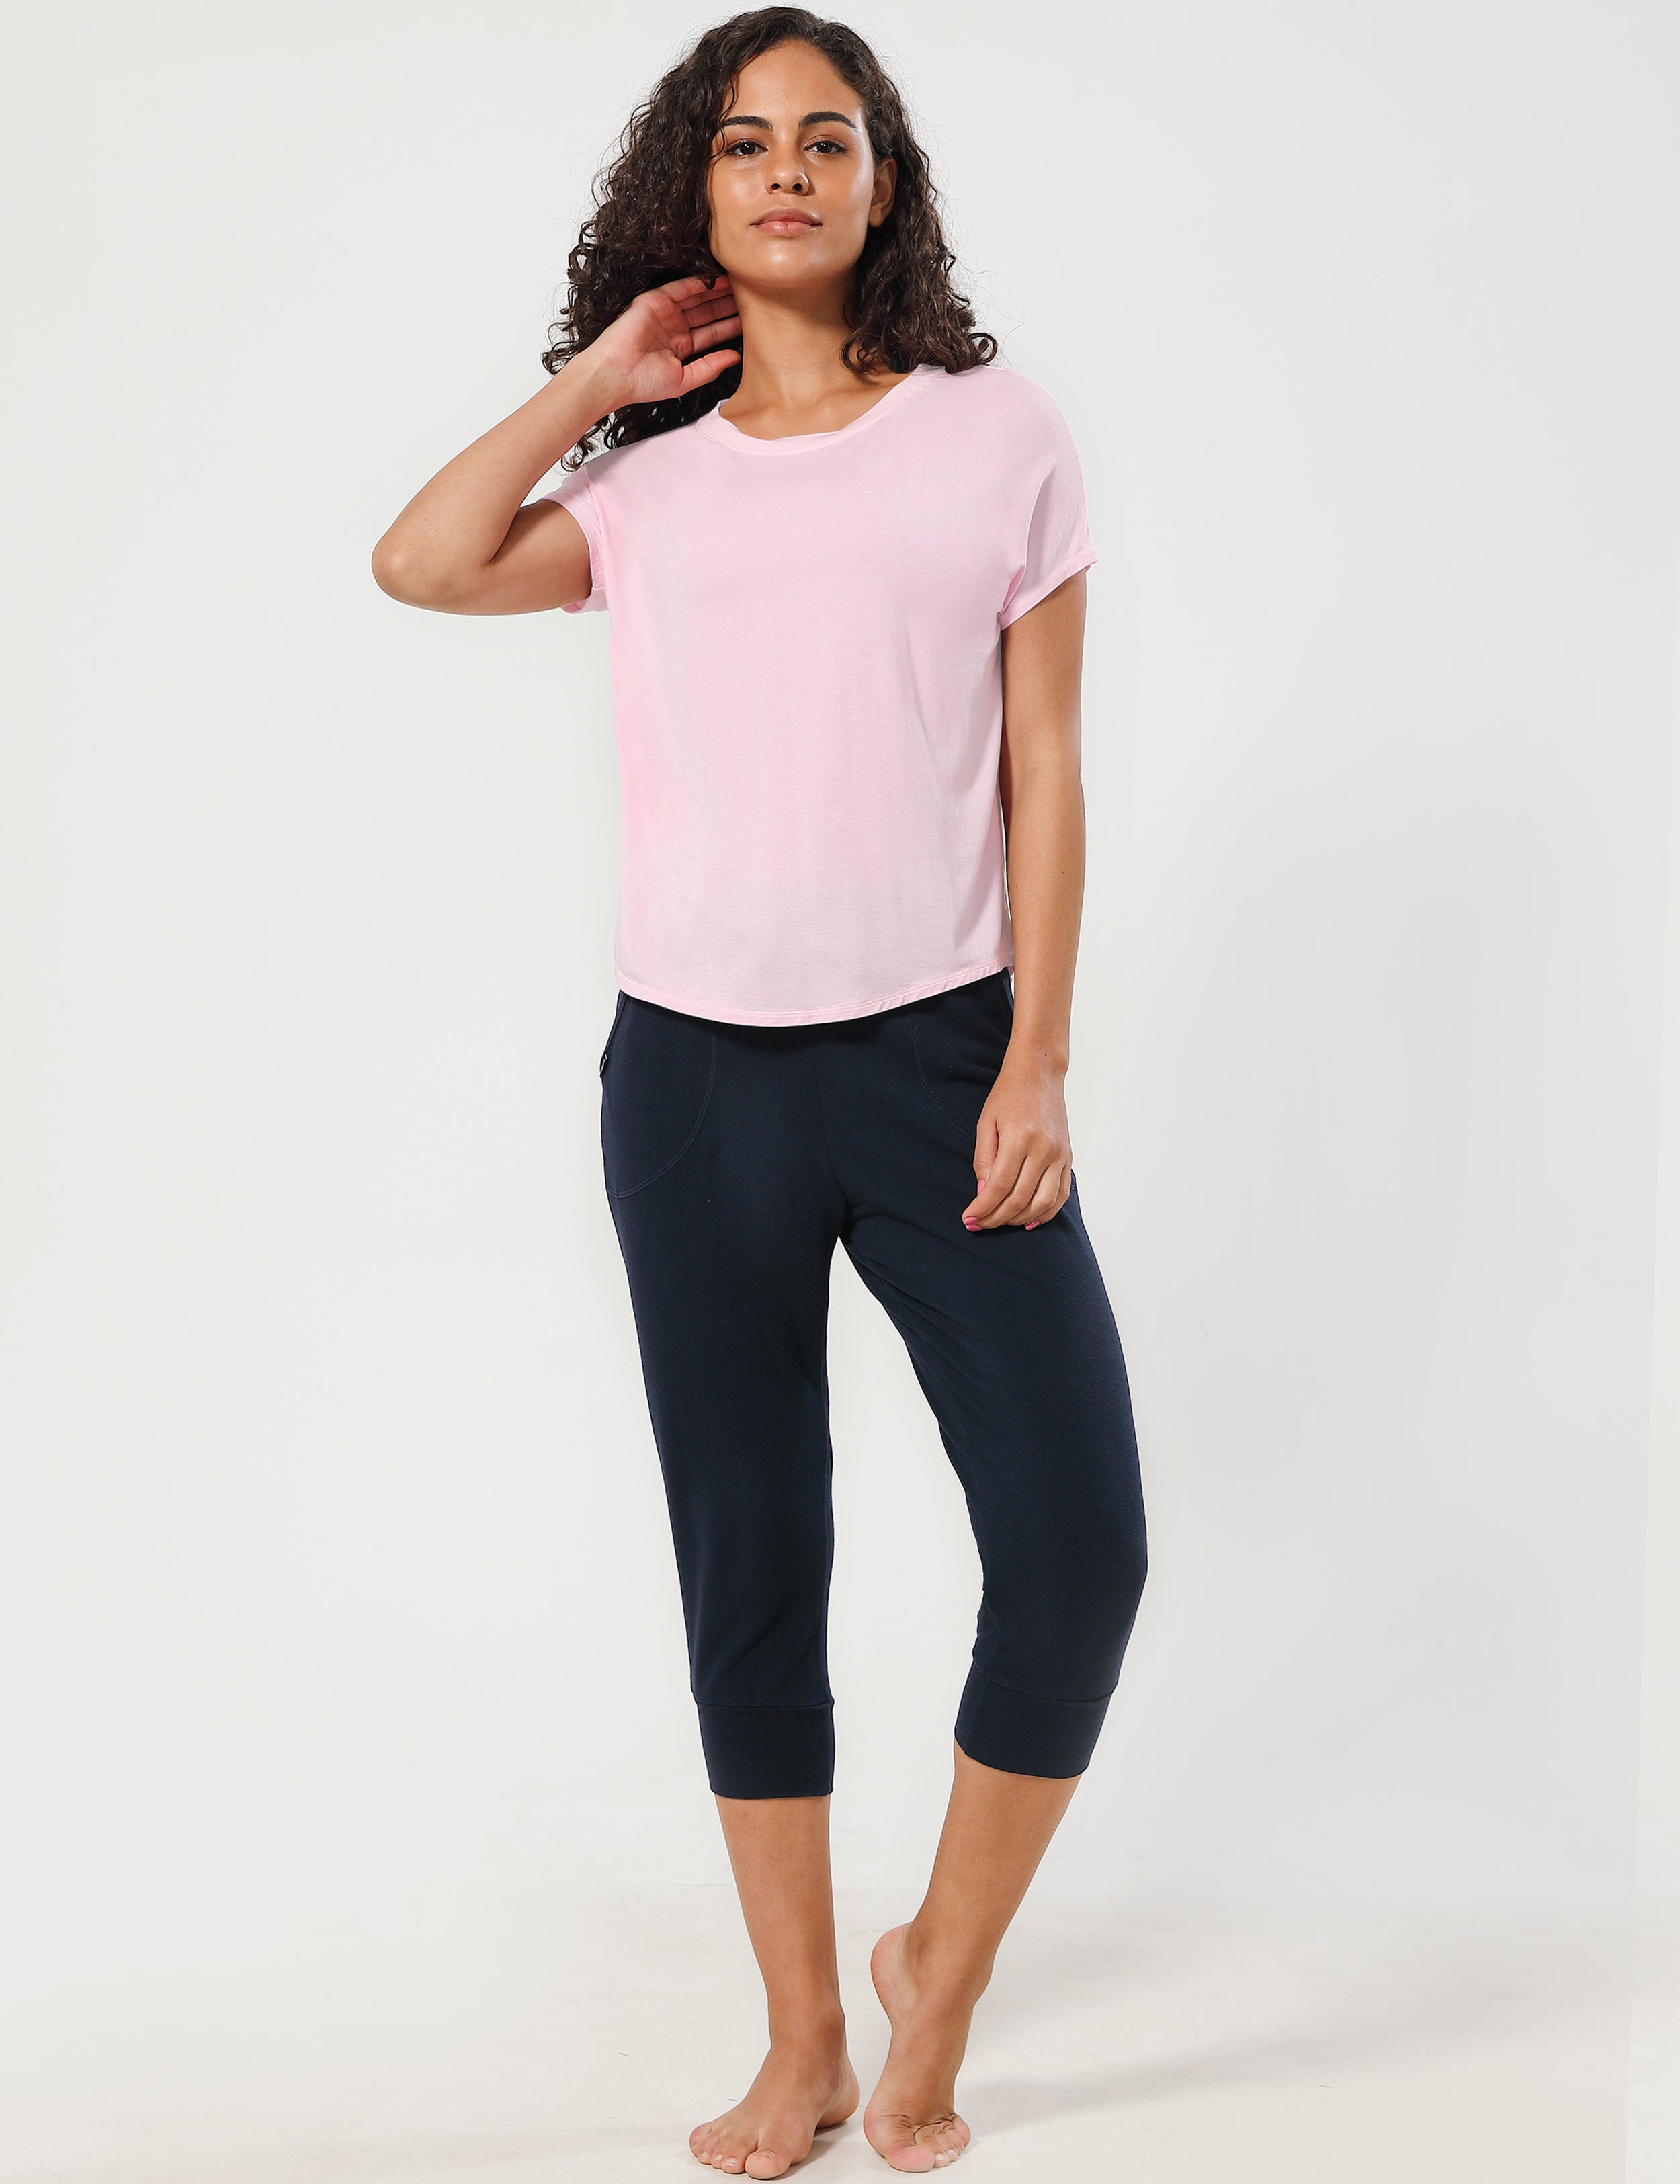 Hip Length Short Sleeve Shirt lightpink 93%Modal/7%Spandex Designed for Running Classic Fit, Hip Length An easy fit that floats away from your body Sits below the waistband for moderate, everyday coverage Lightweight, elastic, strong fabric for moisture absorption and perspiration, sports and fitness clothing.